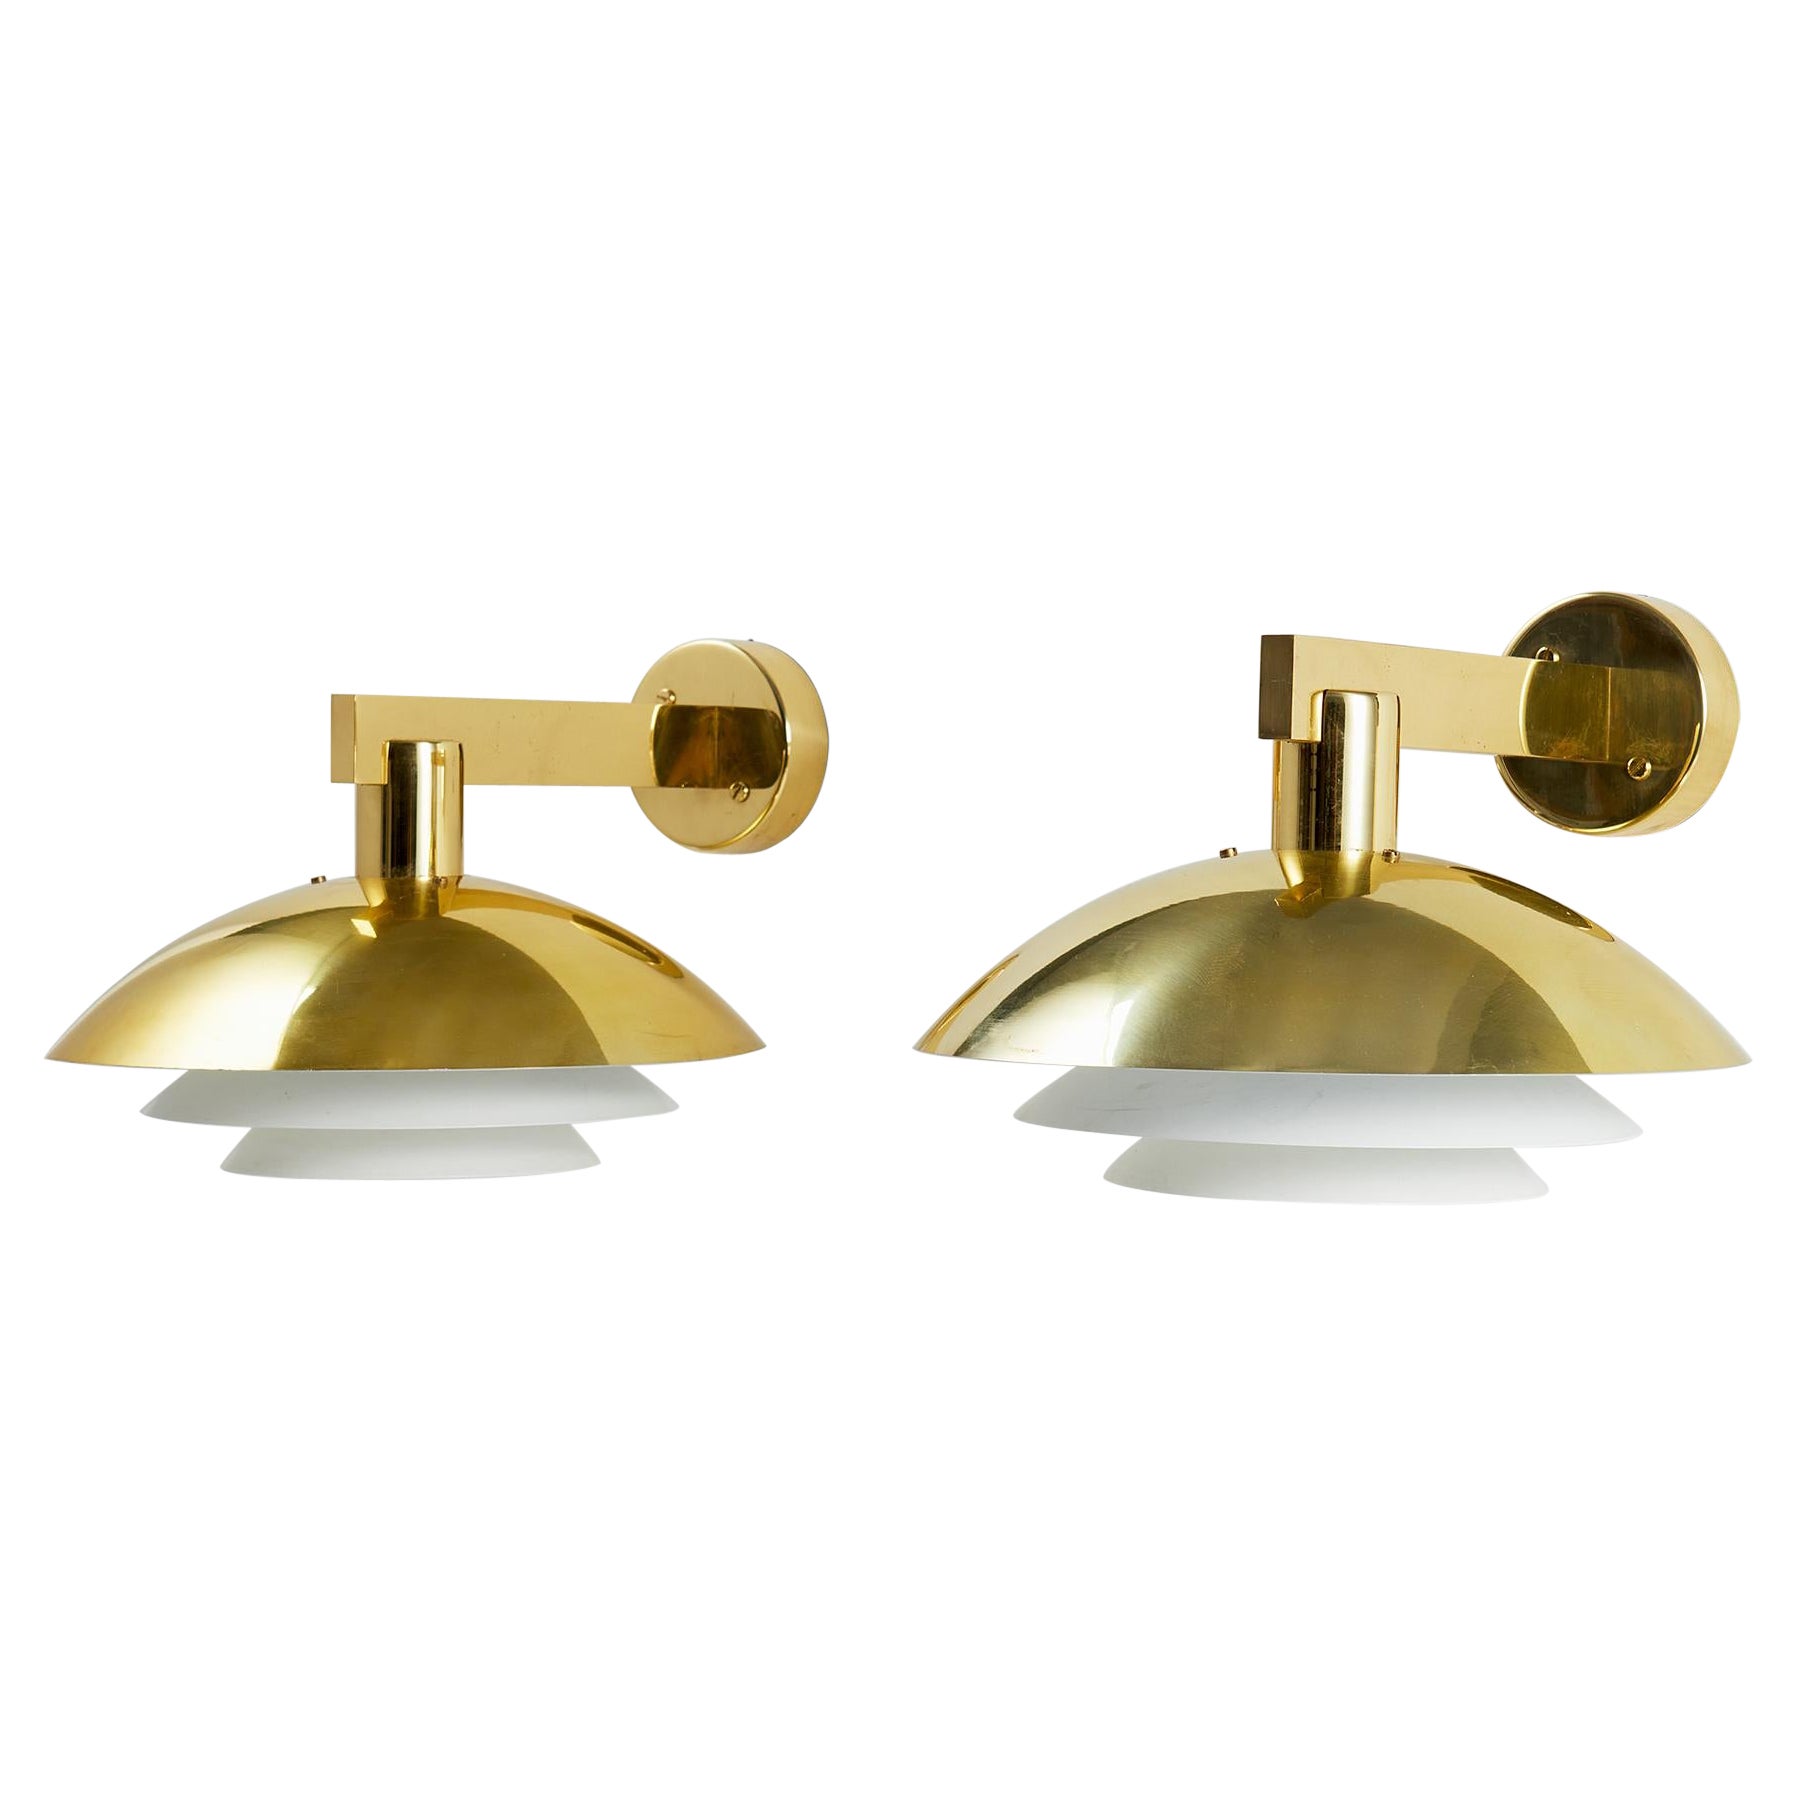 Pair of Wall Lights Designed by Hans-Agne Jakobsson, Sweden, 1960s